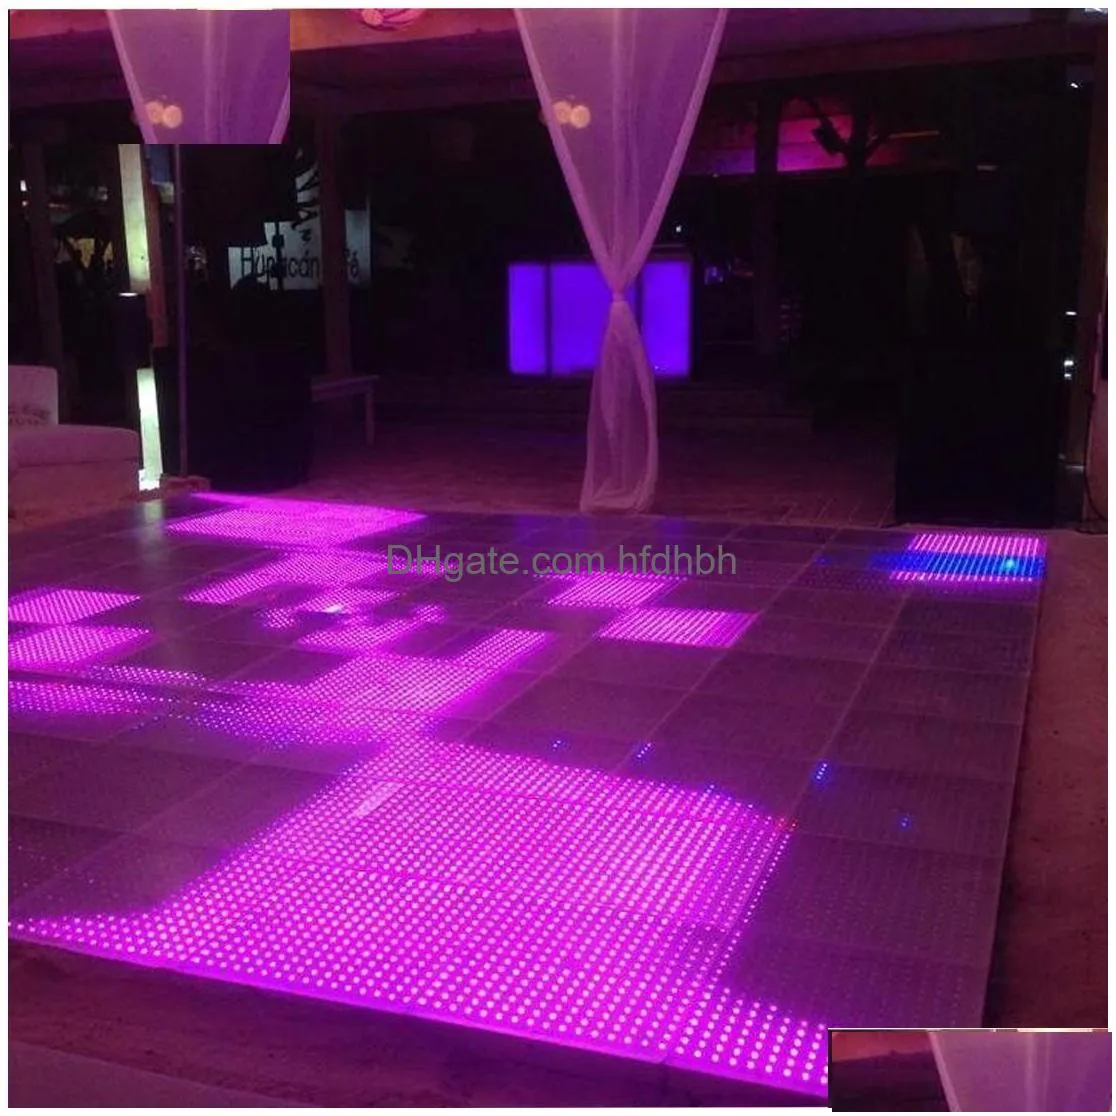 225 pixel led dance floor rgb 3 in 1 dmx512 remote control tempered glass dancing floor tile 50x50cm stage light panel for wediding party disco lighting show load a